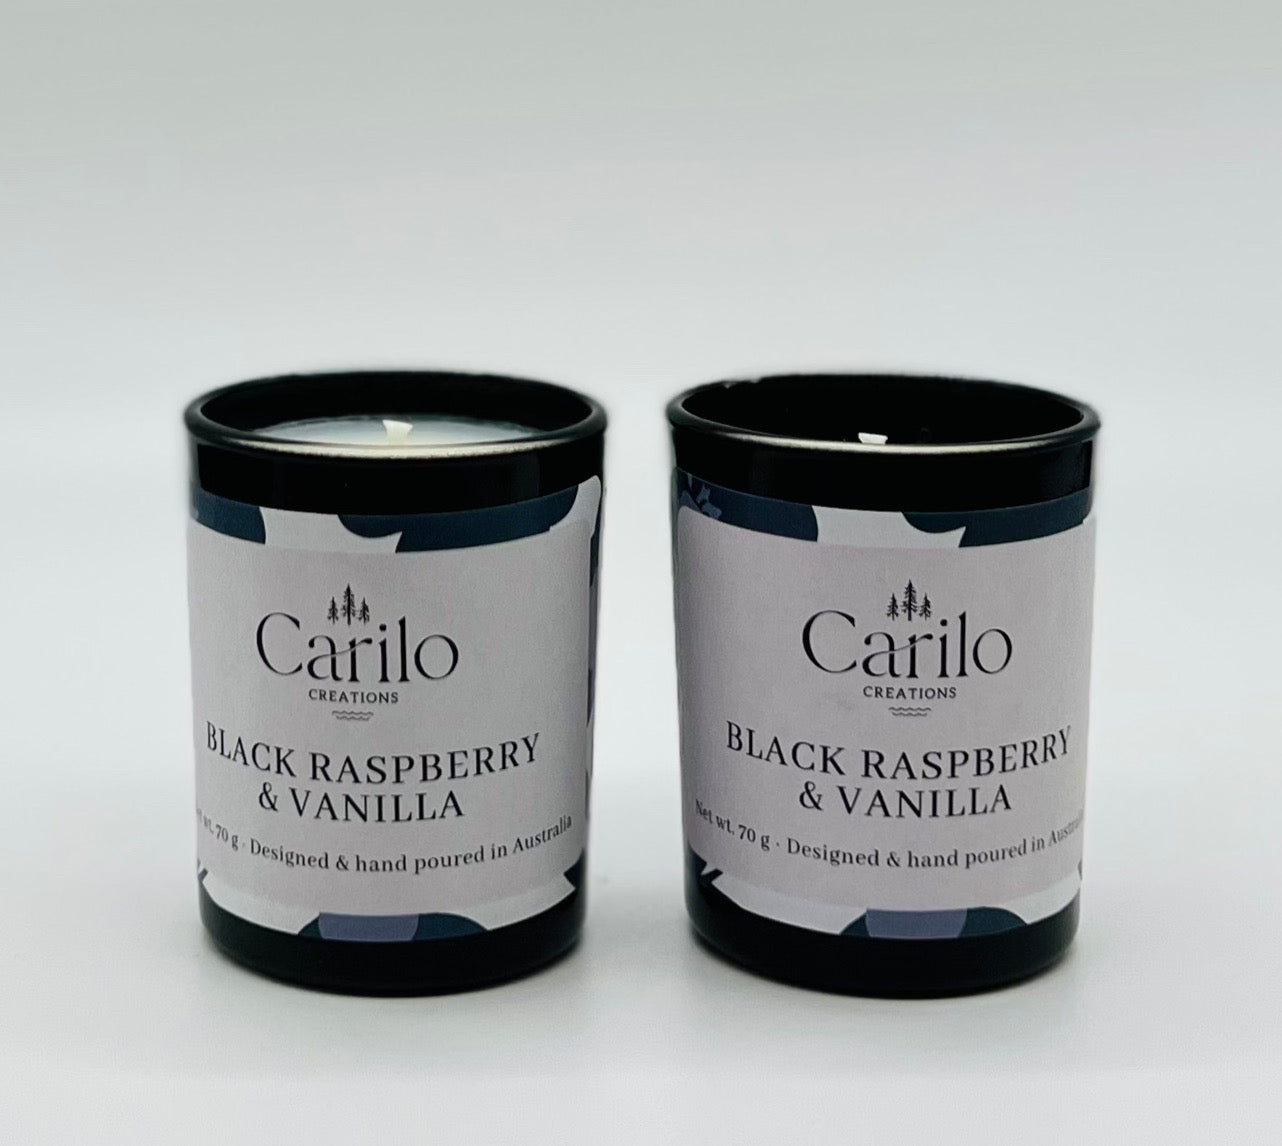 BLACK RASPBERRY & VANILLA - DELUXE DUO SCENTED CANDLES - 70g each